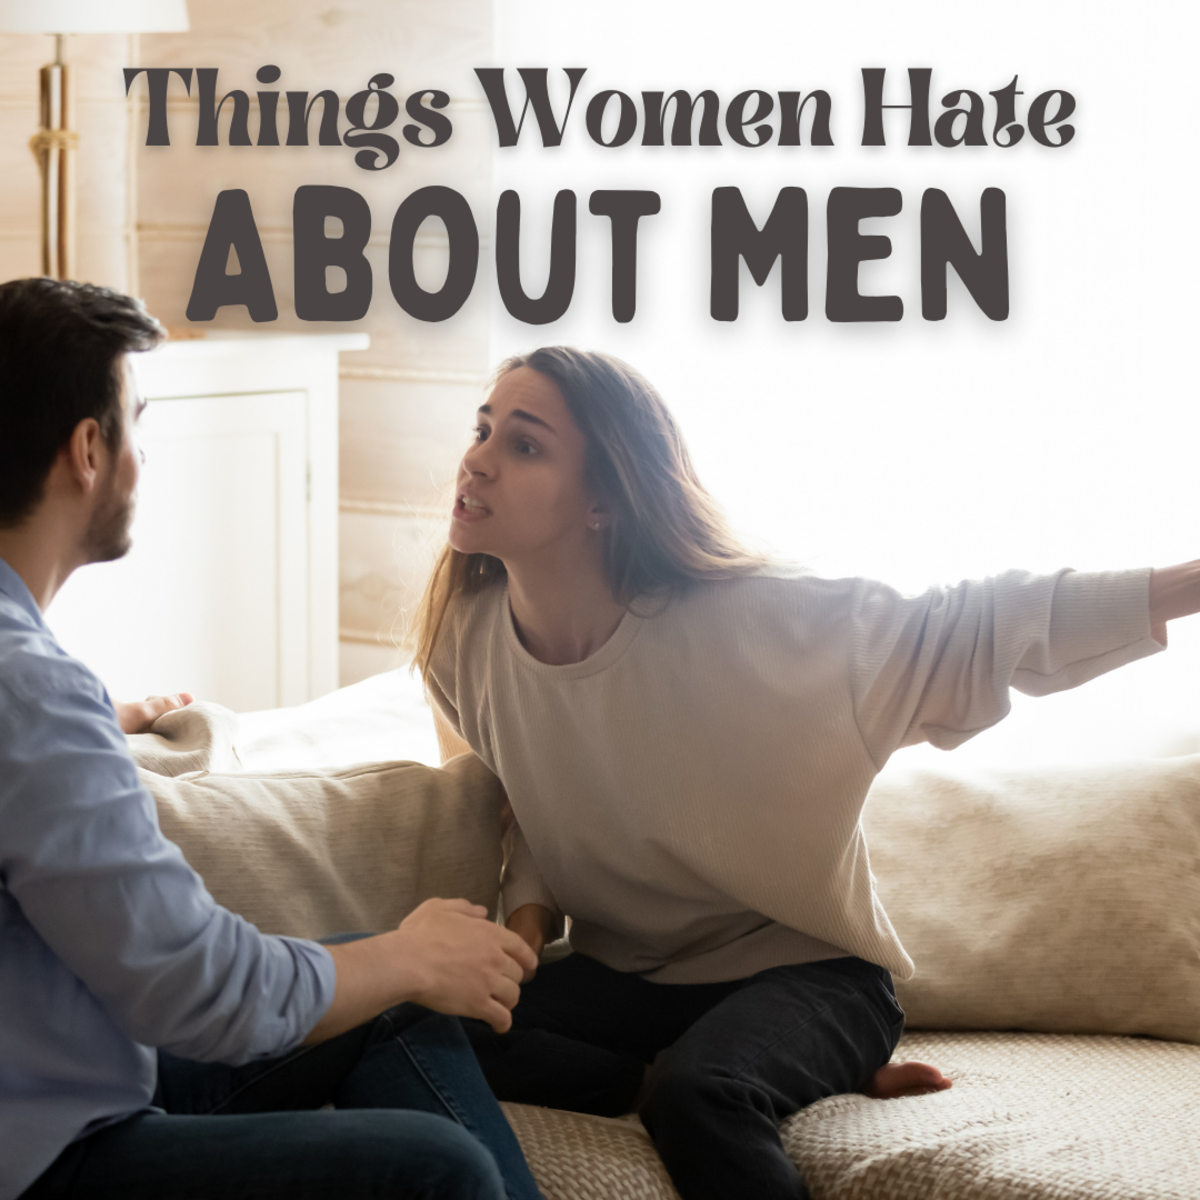 What Women Hate About Men: 15 Bad Habits and Behaviors - PairedLife